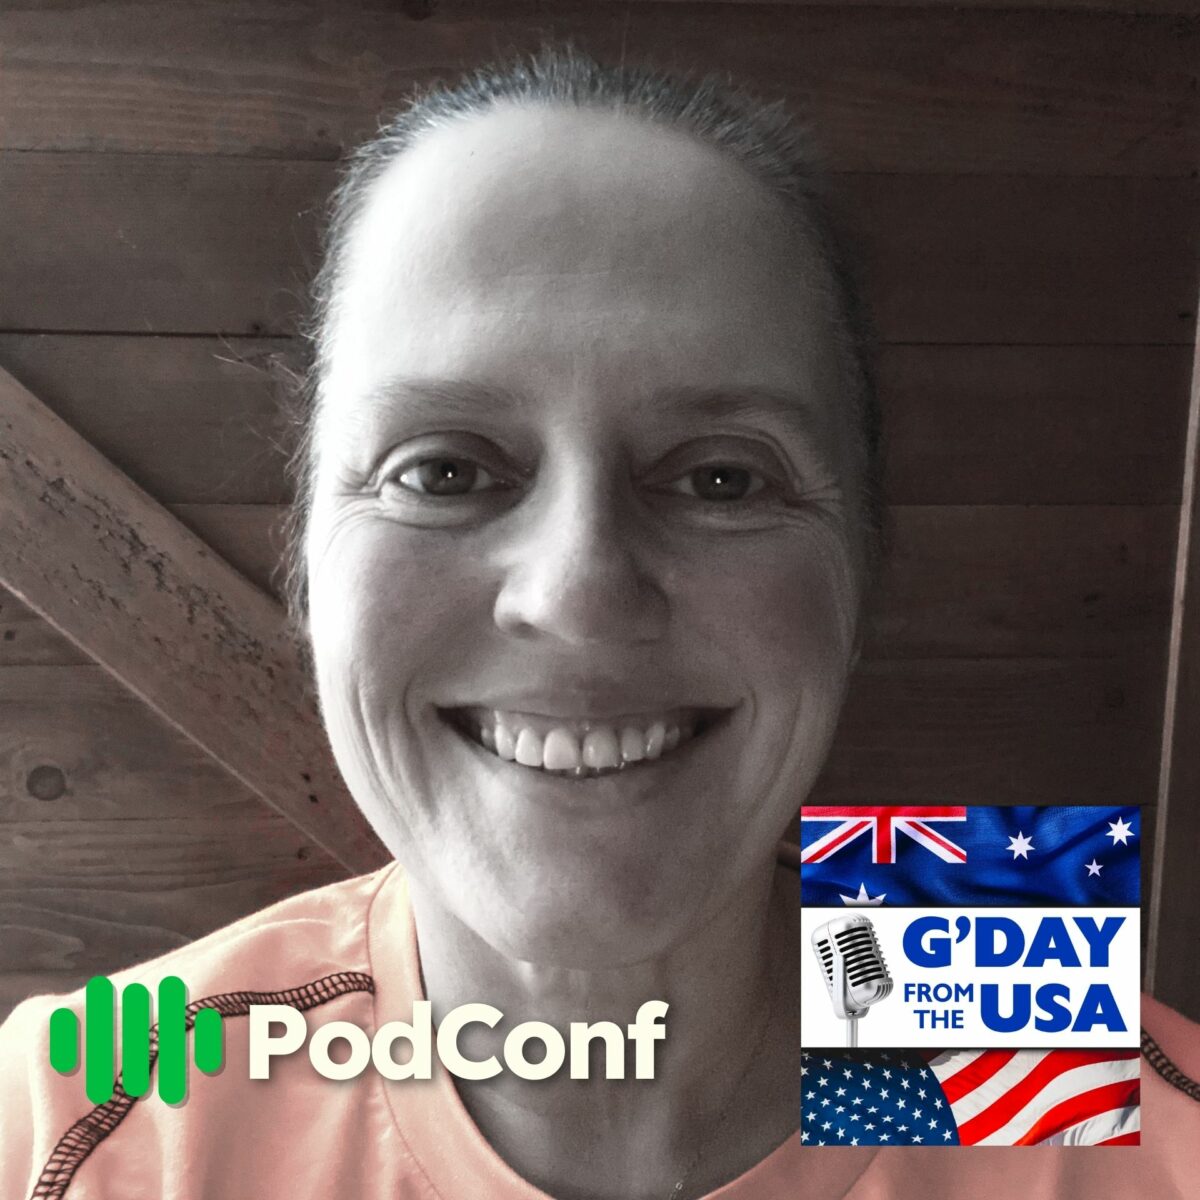 Lady Amanda / G’Day From The USA / PodConf